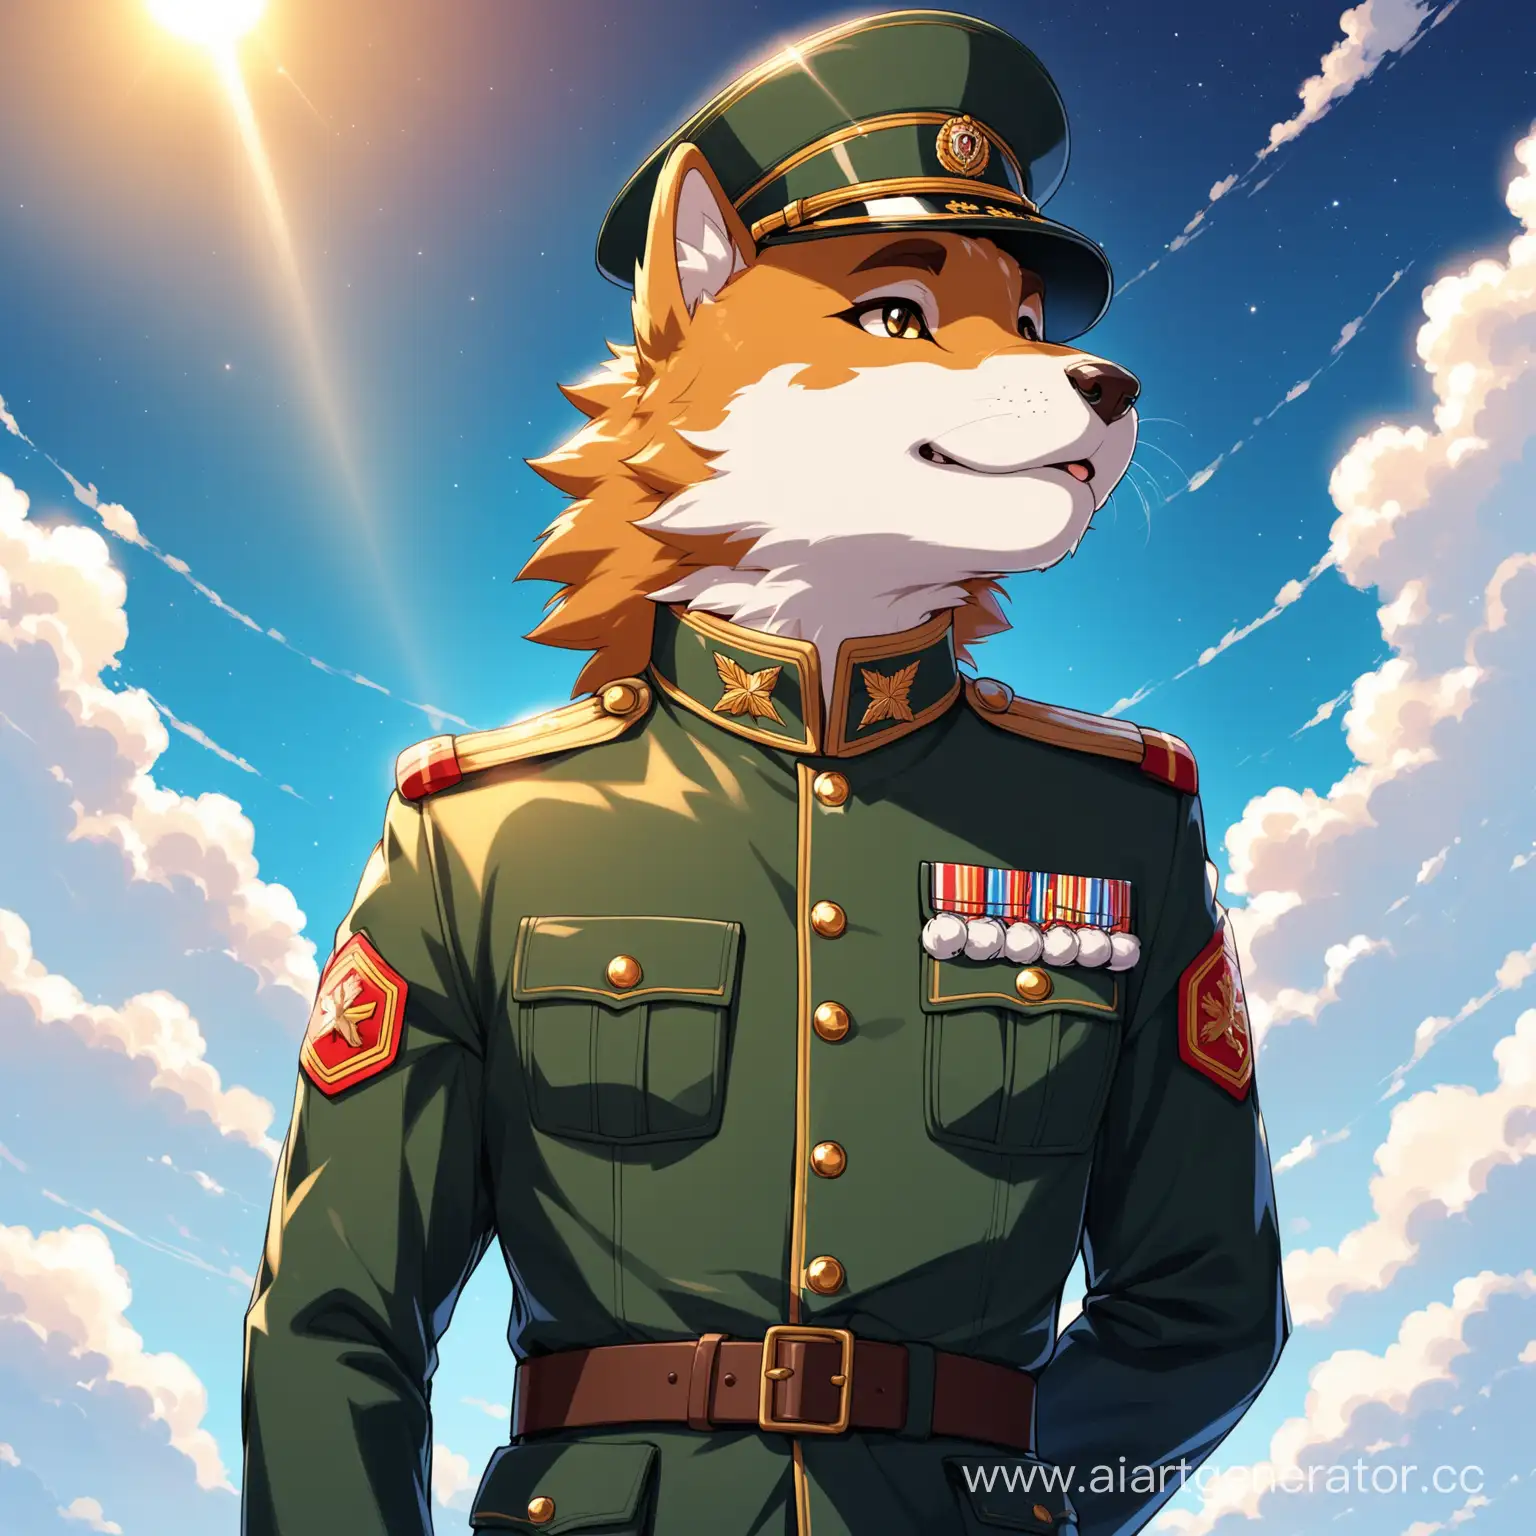 Furry-Boy-in-Military-Uniform-Gazing-at-the-Sky